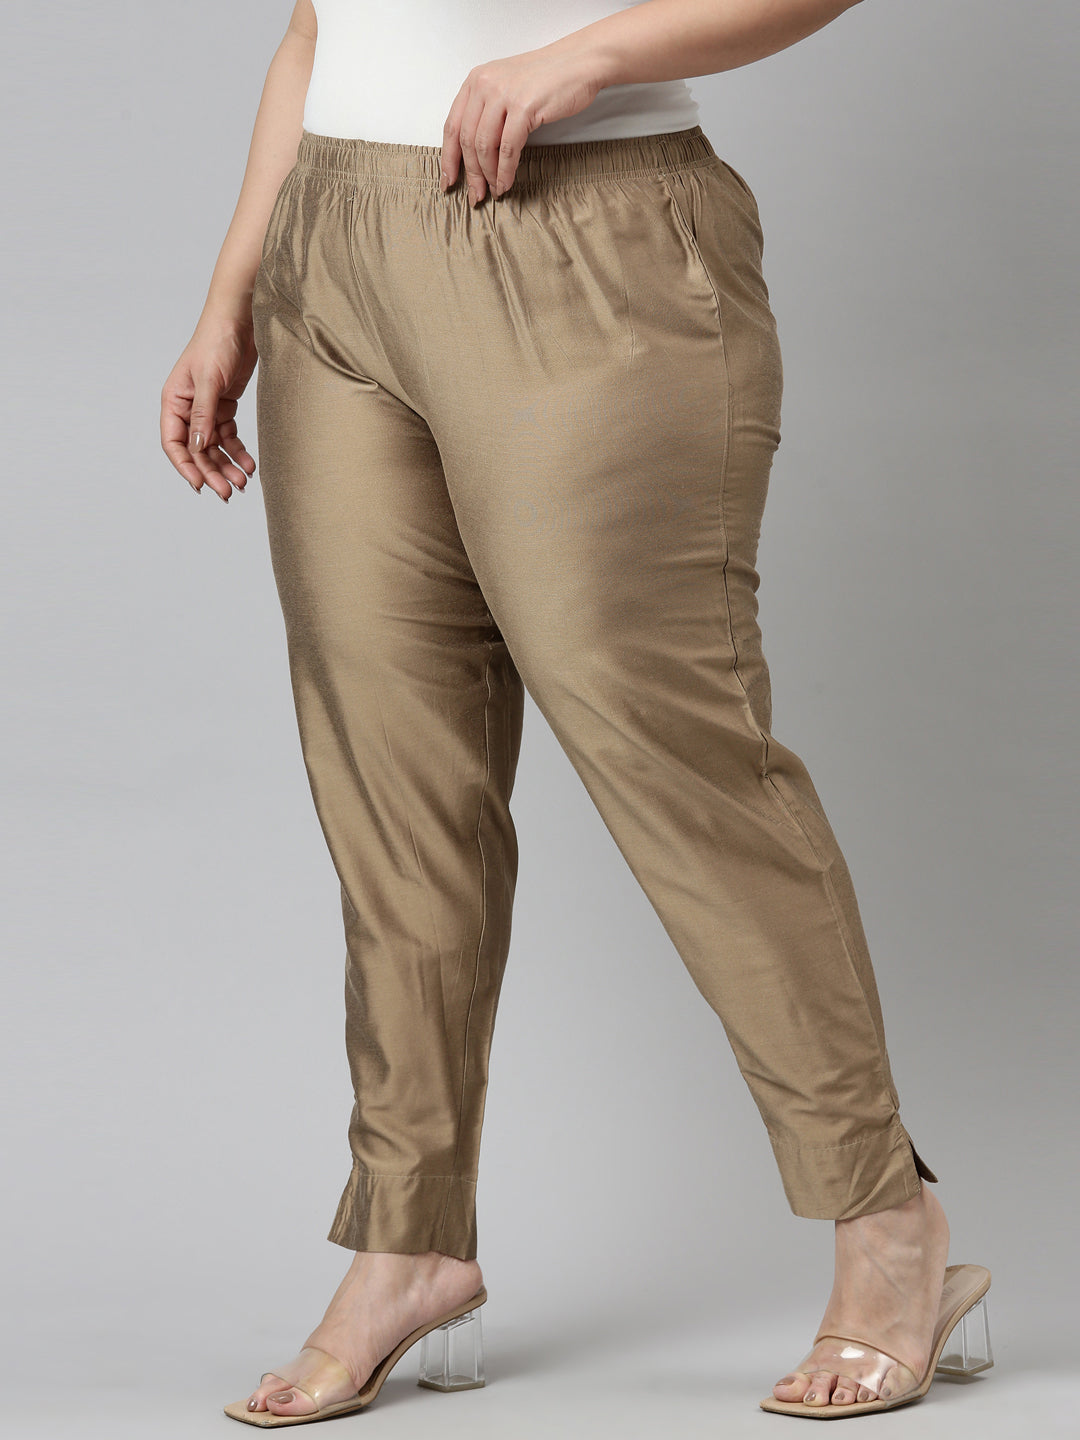 Golden plain silk blend palazzo pants  ETHNICALLY YOURS  3201543